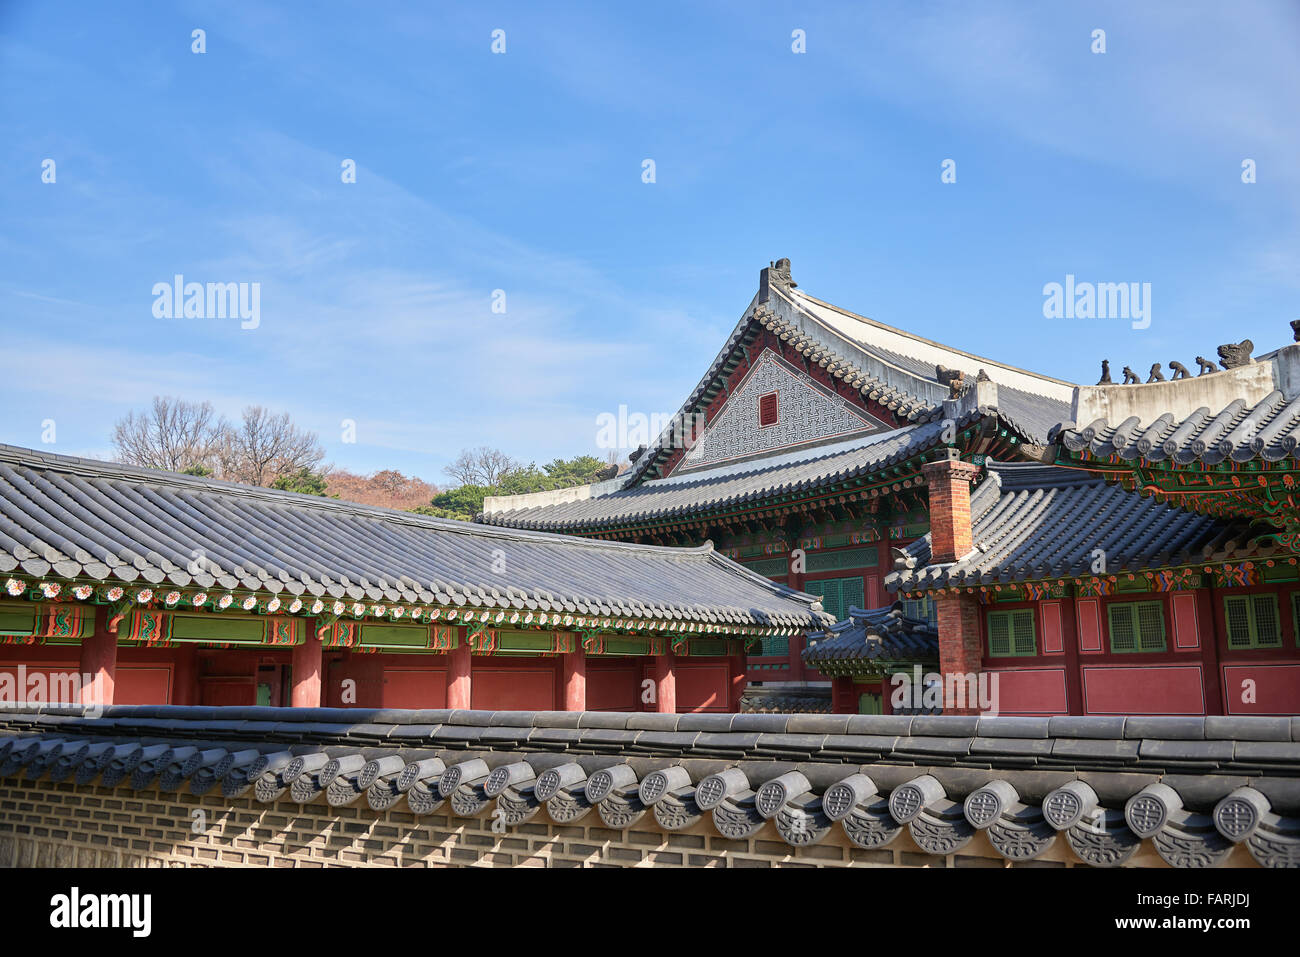 tiled roofs of Korean traditional palace in Seoul Stock Photo